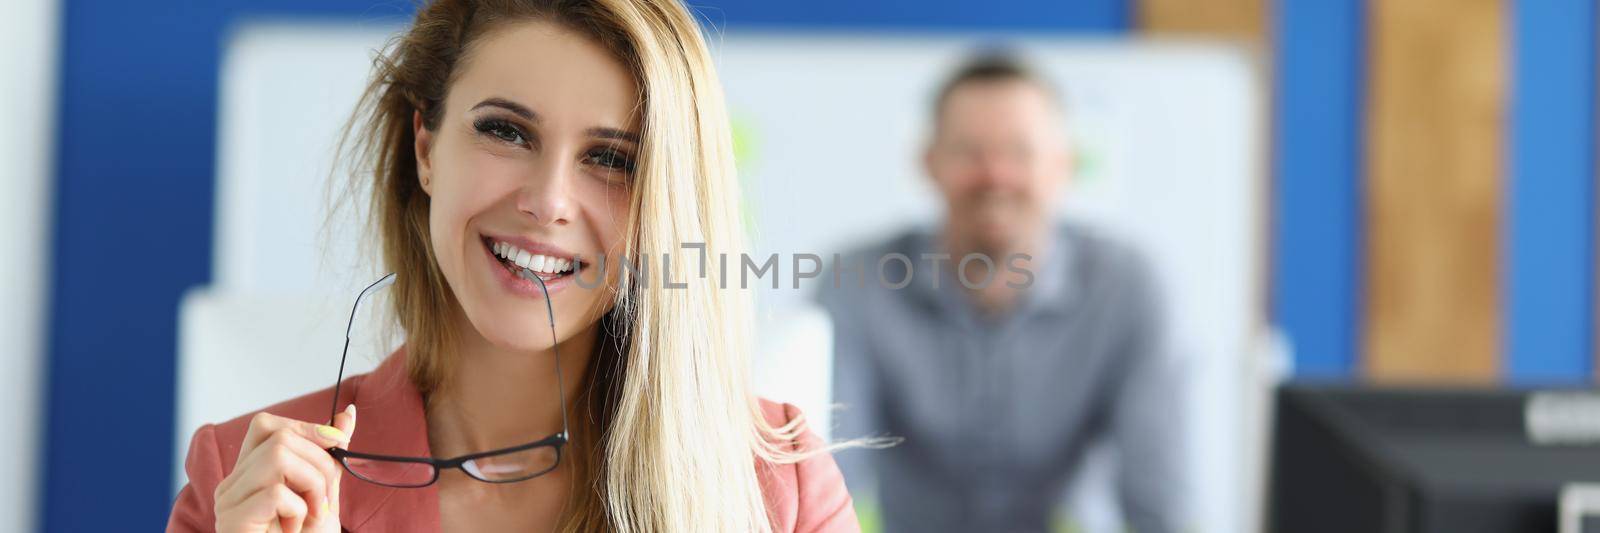 Portrait of cheerful optimistic female with clipboard, company dress code, office worker in suit. Perform daily tasks on workplace, woman employee, colleague on background. Business, career concept